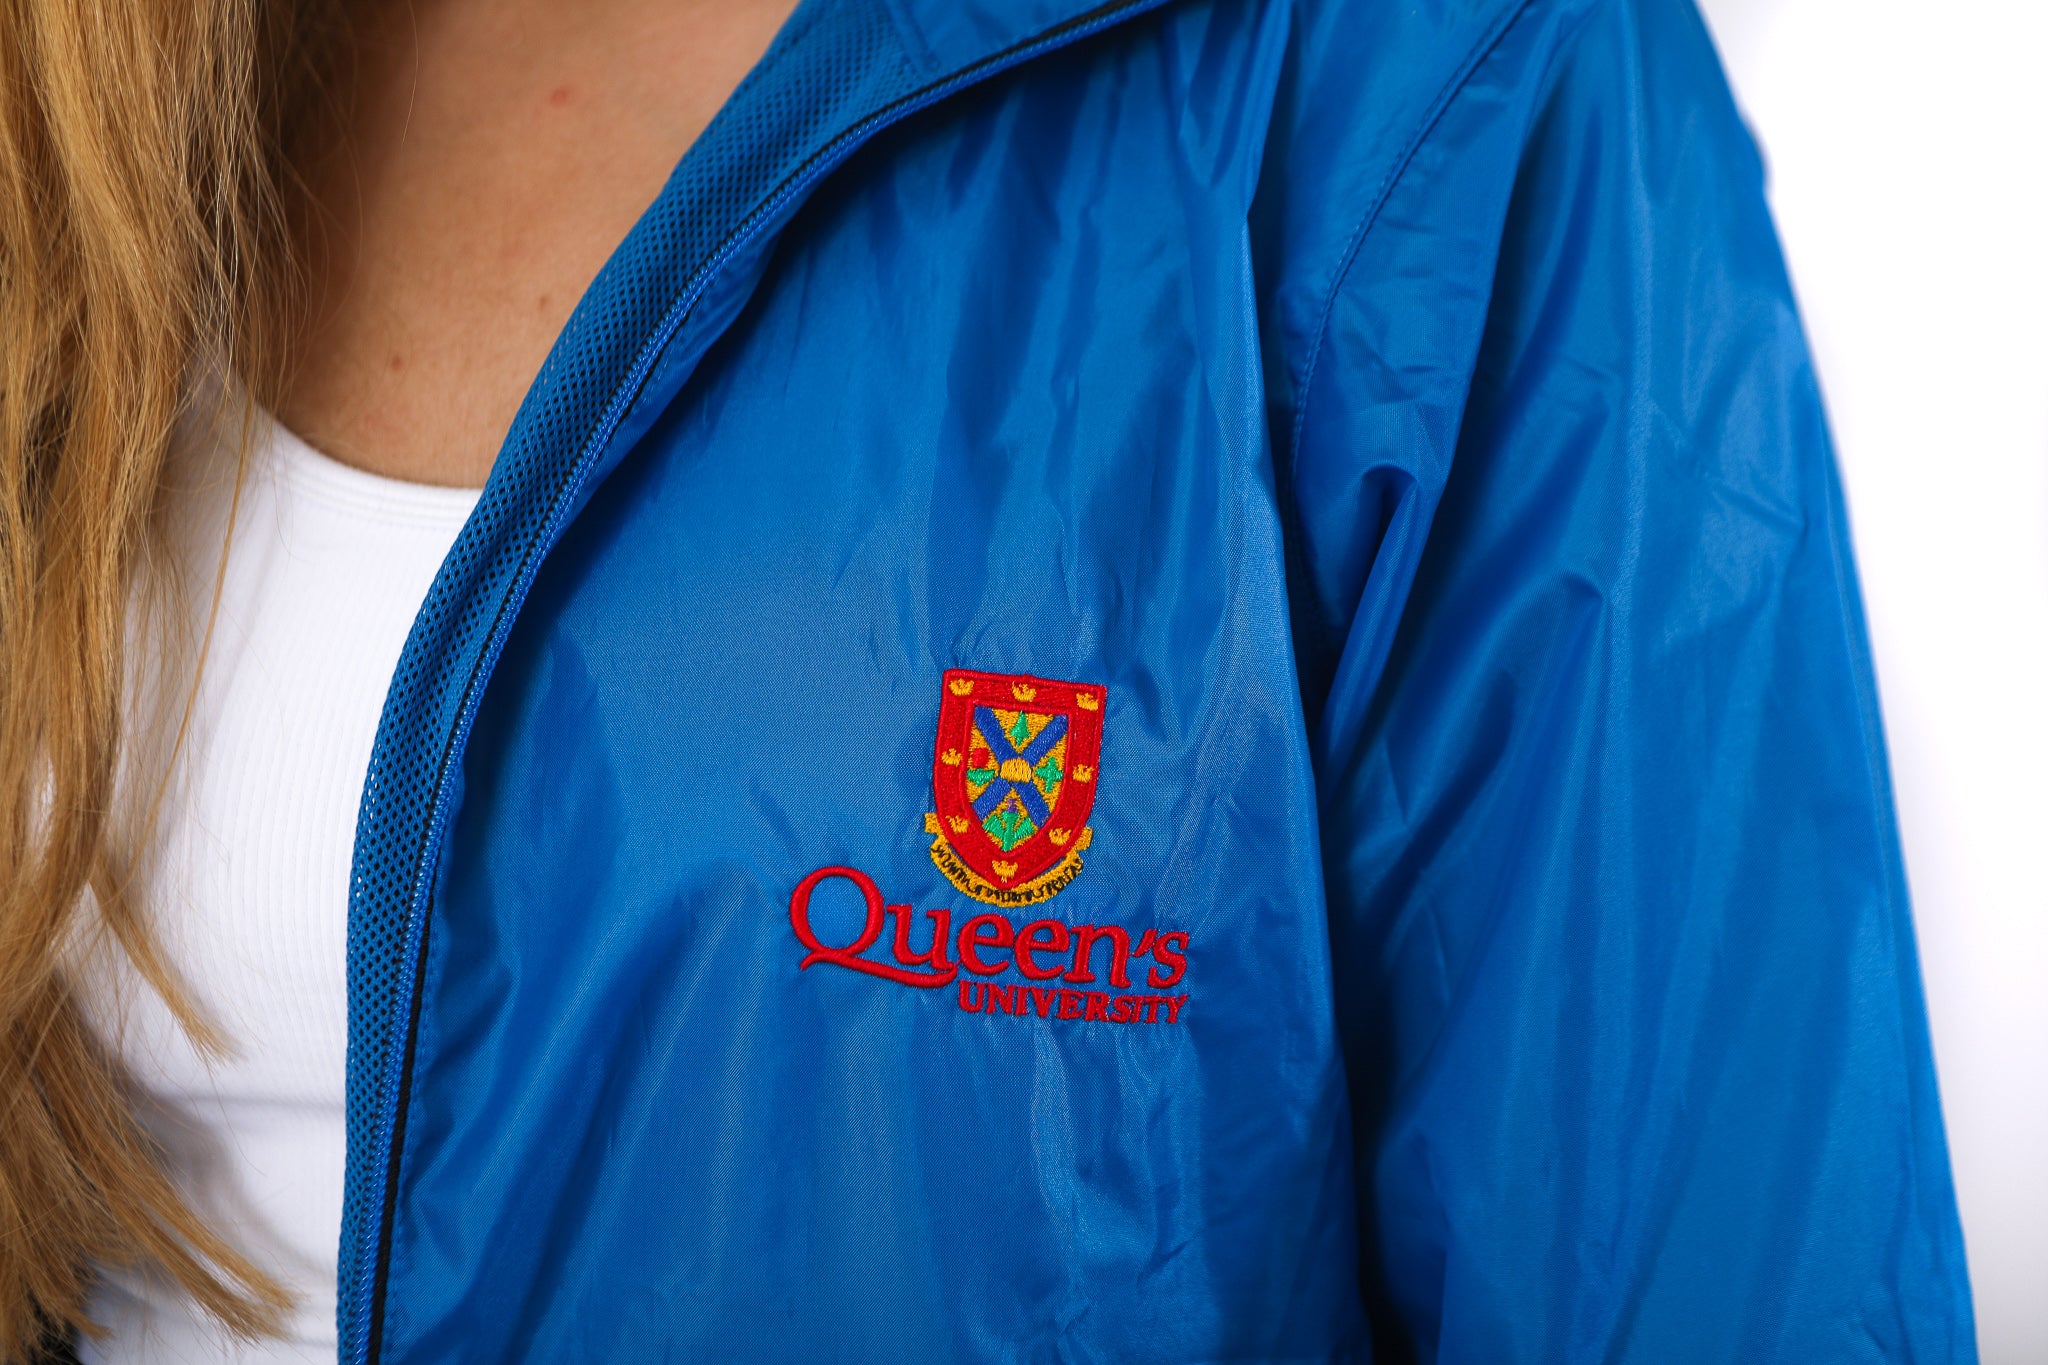 Close up of blue zip up rain jacket with red Queen's crest logo